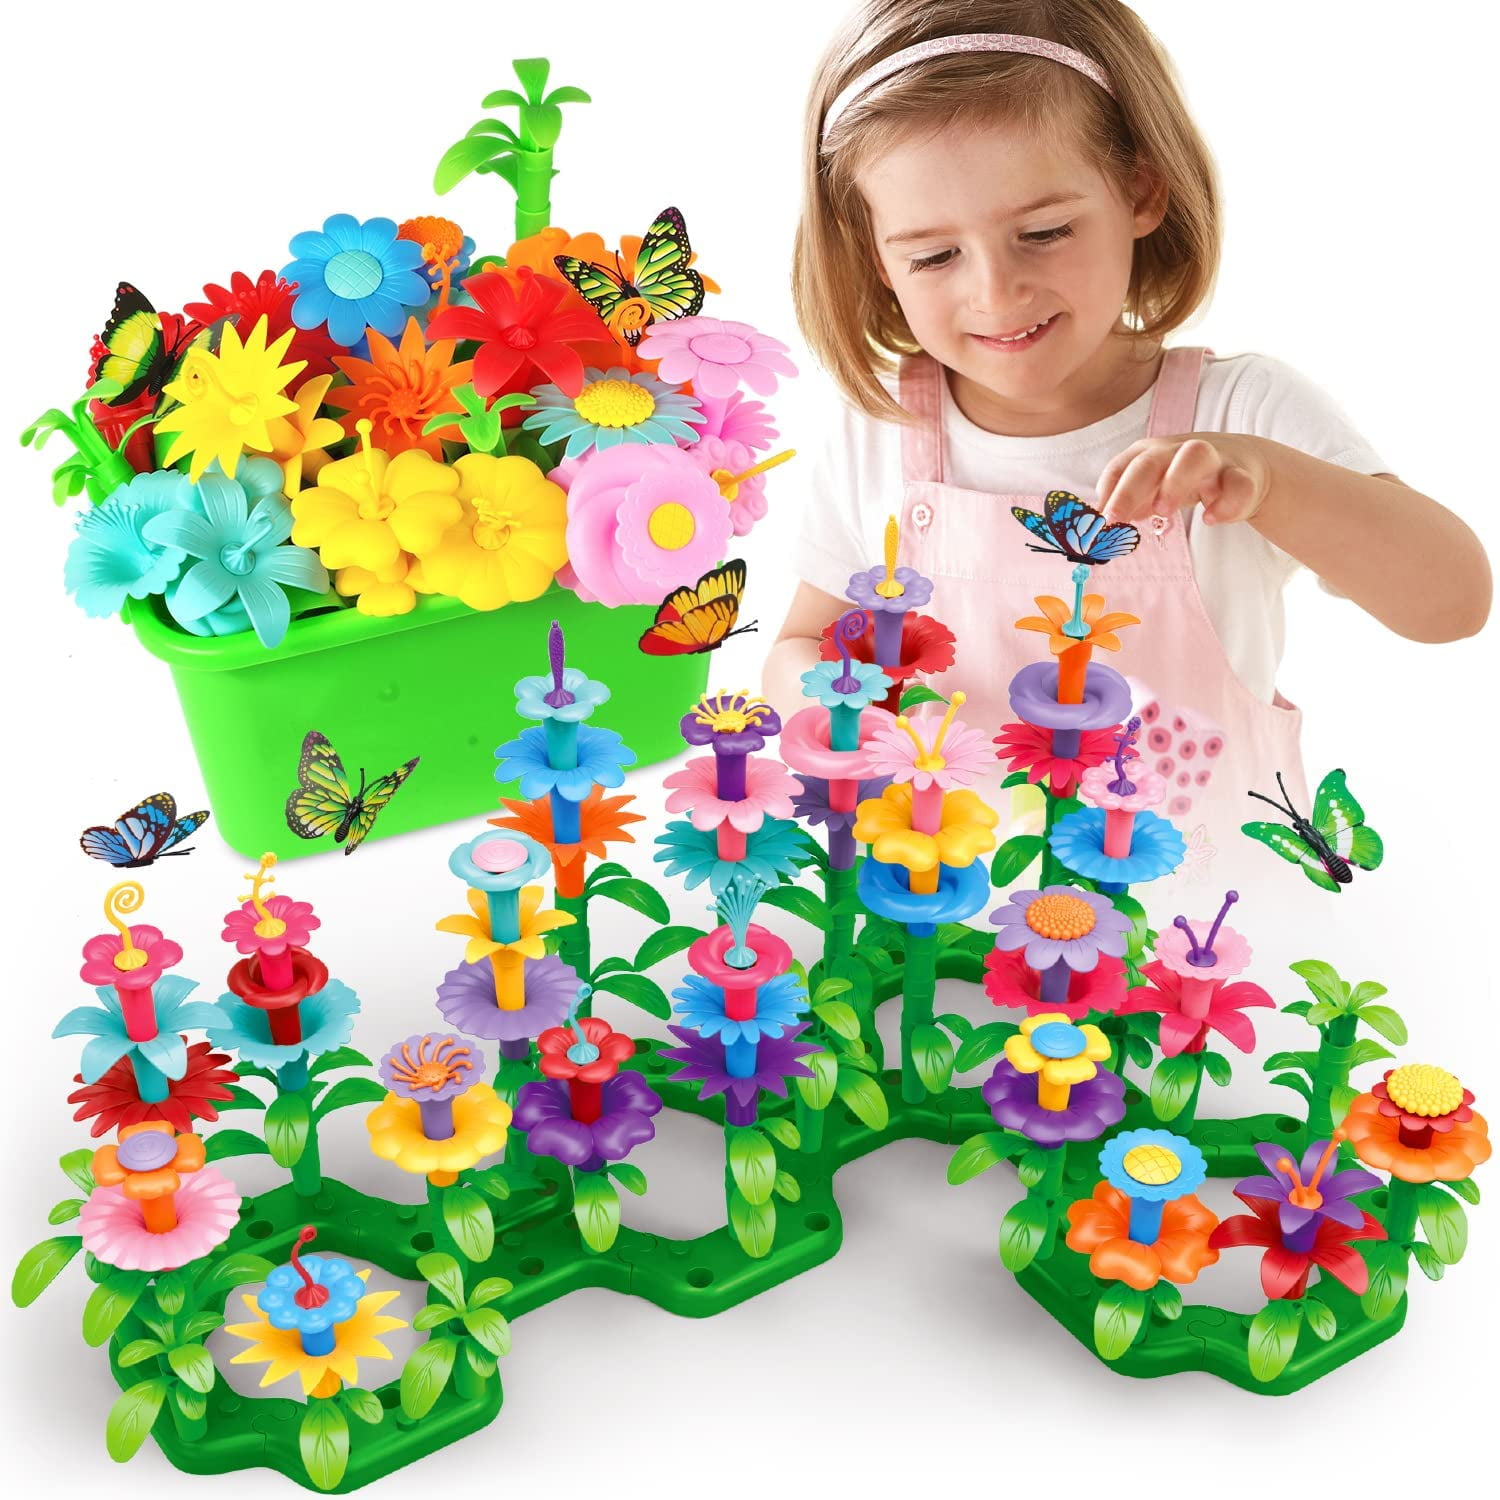 SpringFlower Fort Building Kit for Kids,STEM Construction Toys, Educational  Gift for 3 4 5 6 7 8 9 10 11 12 Years Old Boys and Girls,Ultimate Creative